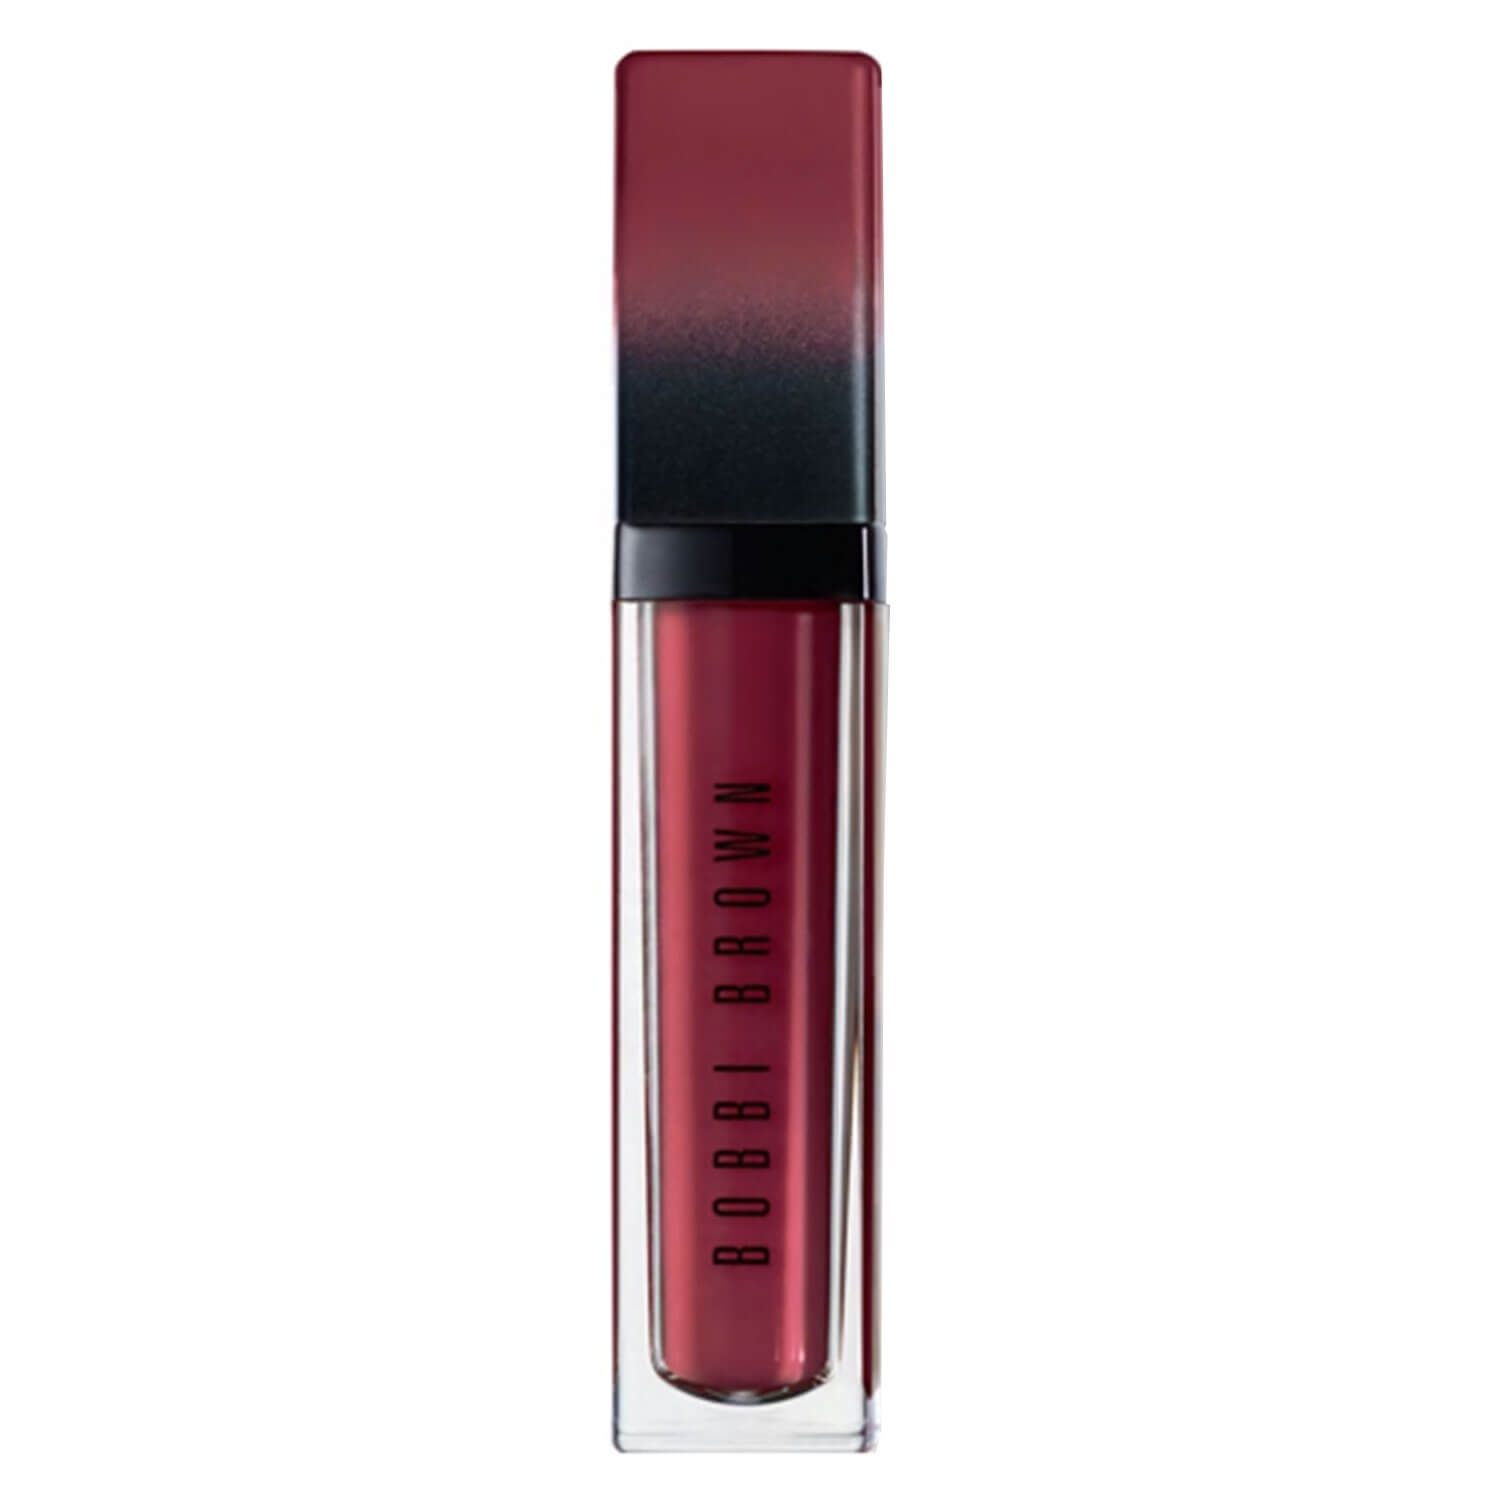 Product image from BB Lip Color - Crushed Liquid Lip Color Hush Hush